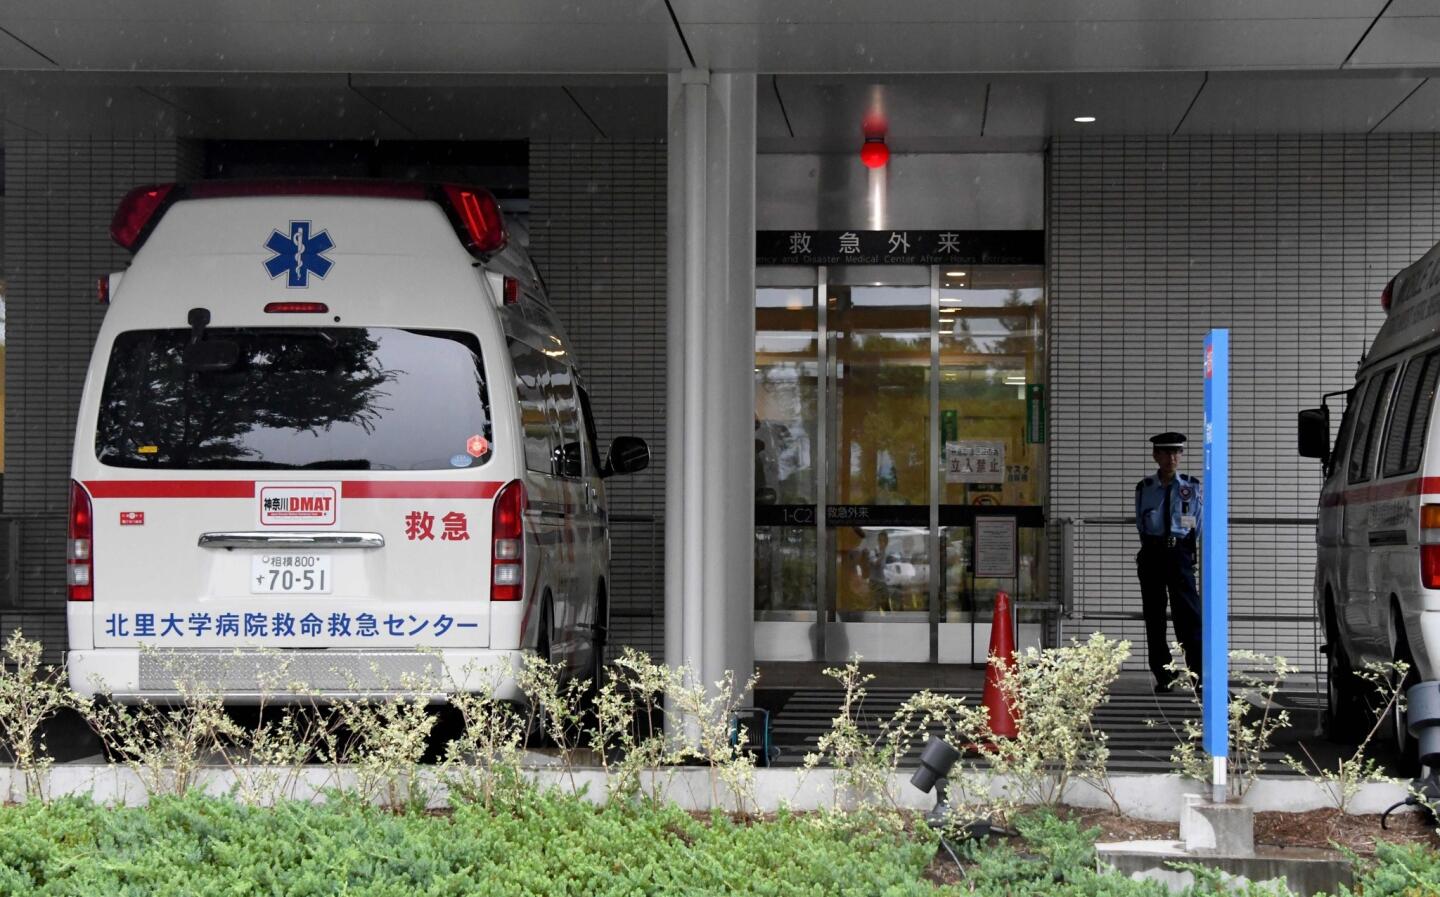 Ambulances wait at the entrance of Kitasato University hospital after more than a dozen injured people were brought after an attack at a residential-care facility.